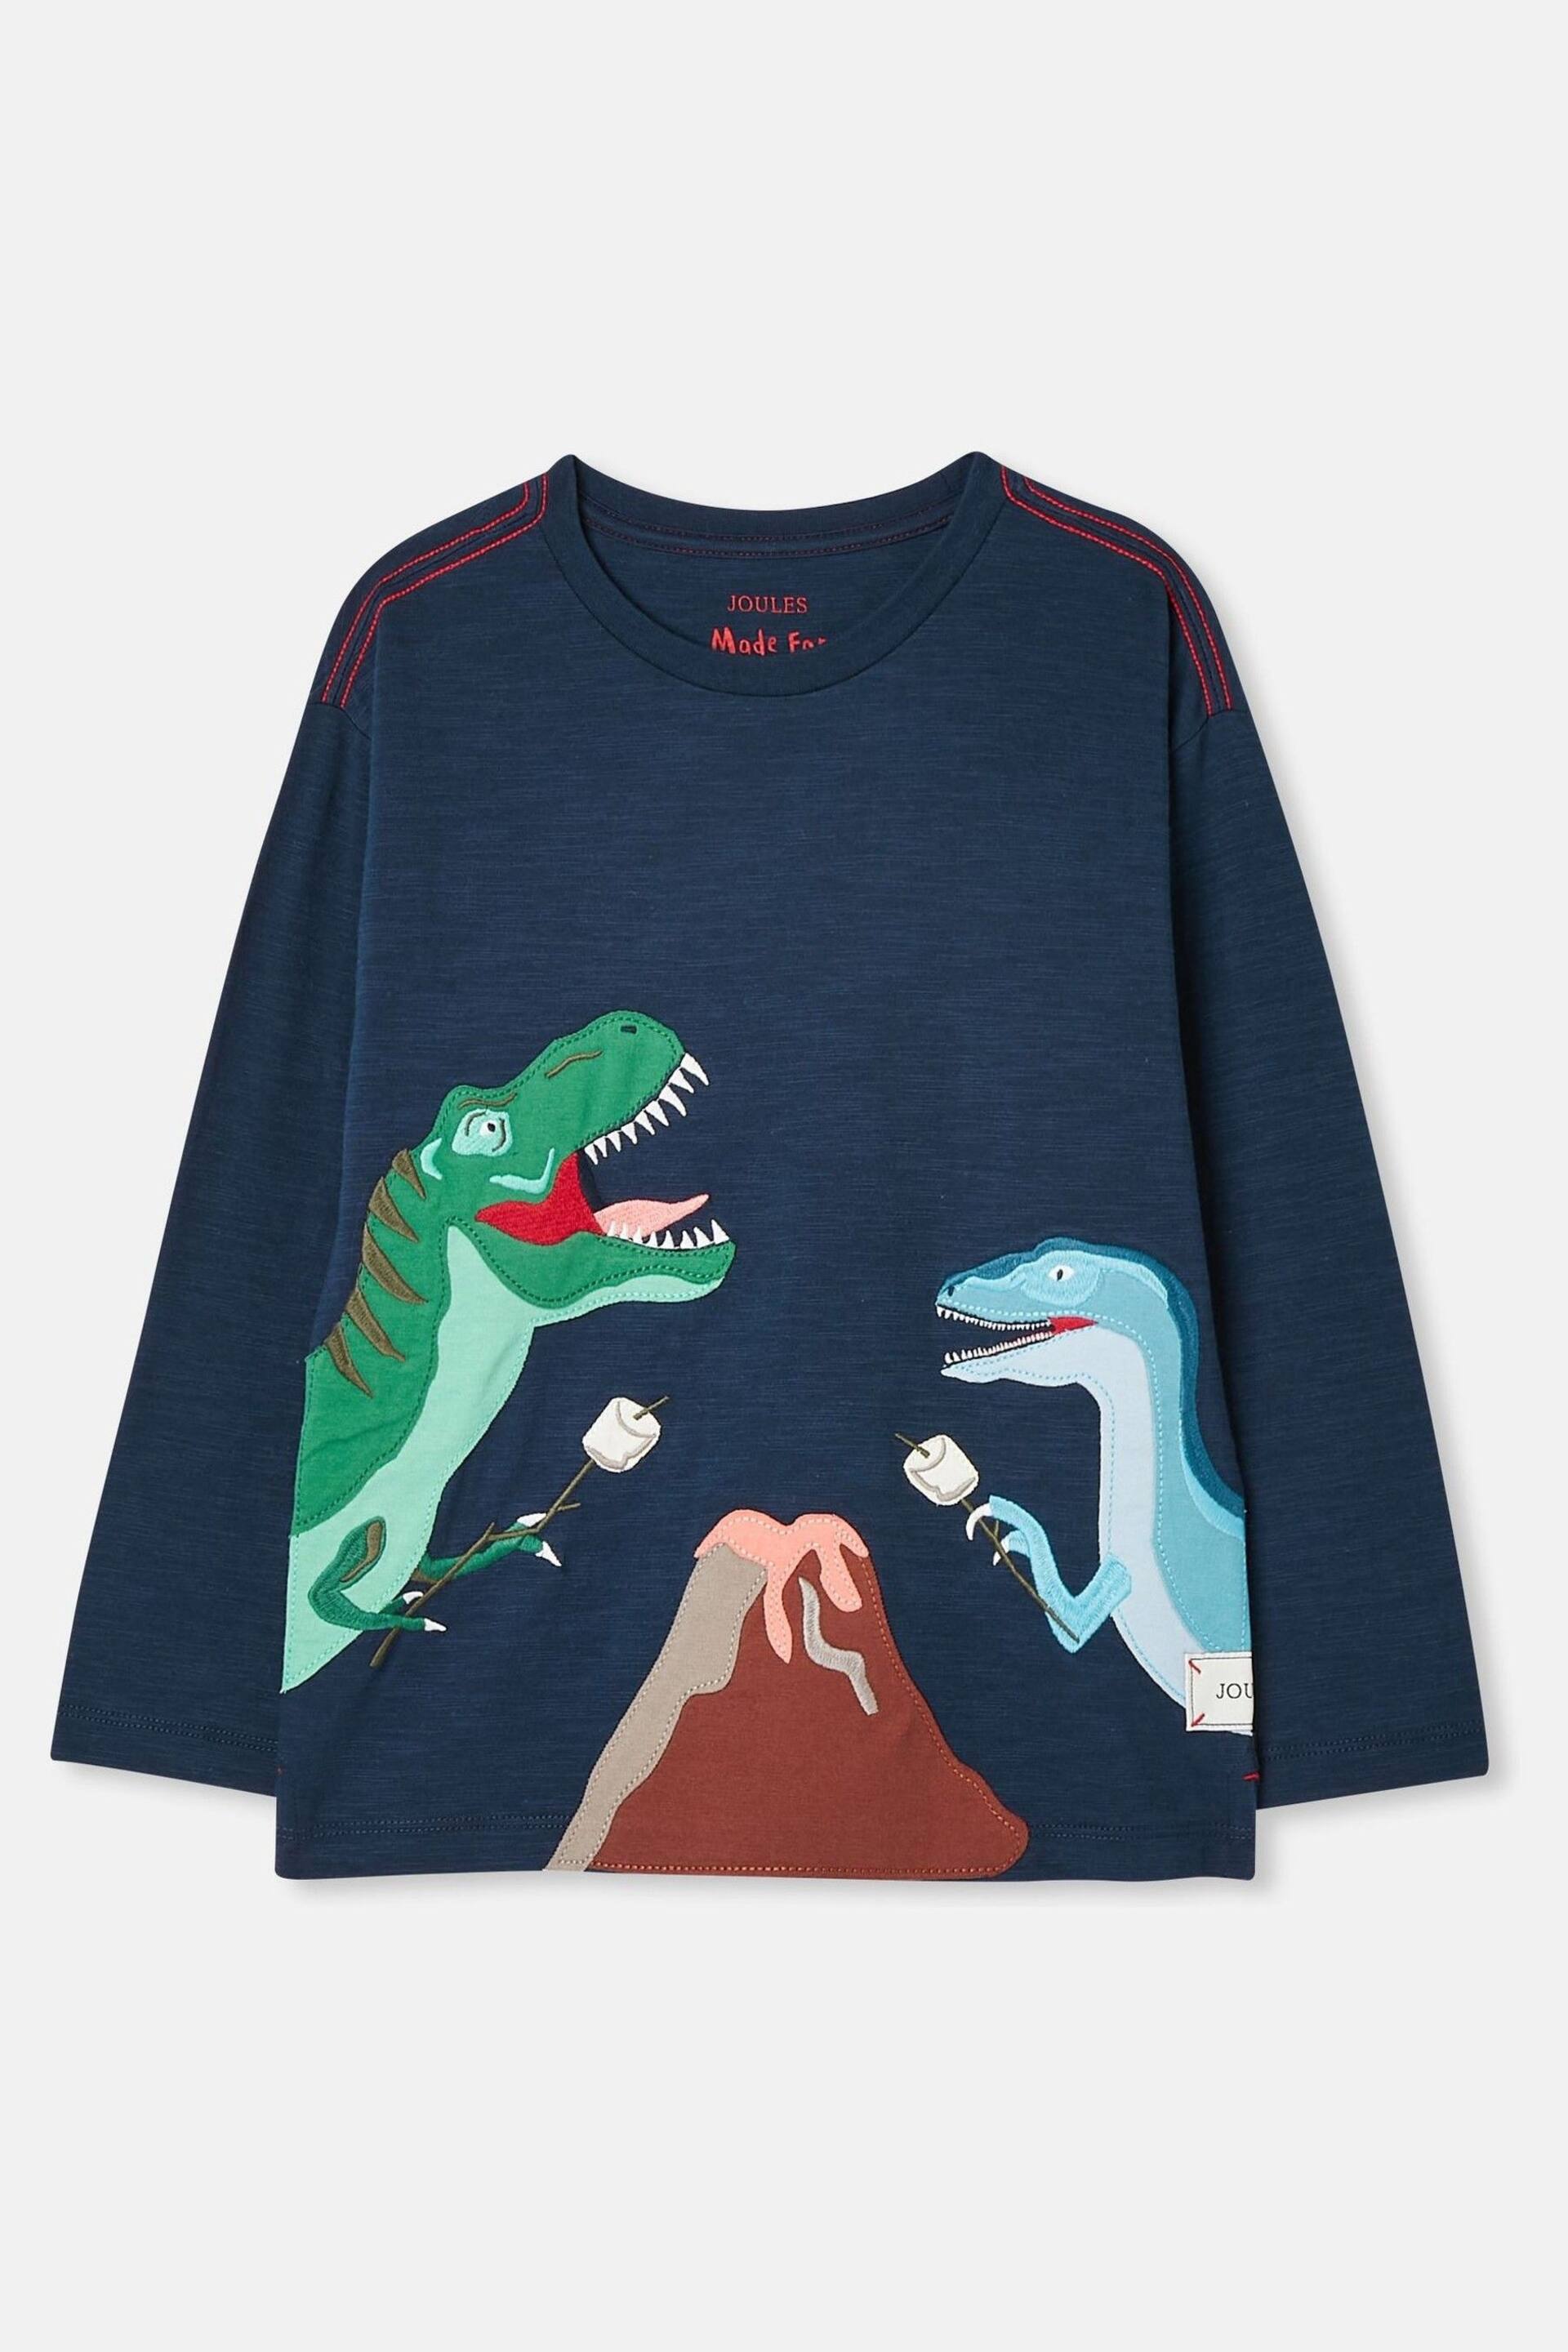 Joules Dylan Navy Long Sleeve Dinosaur T-Shirt - Image 6 of 11